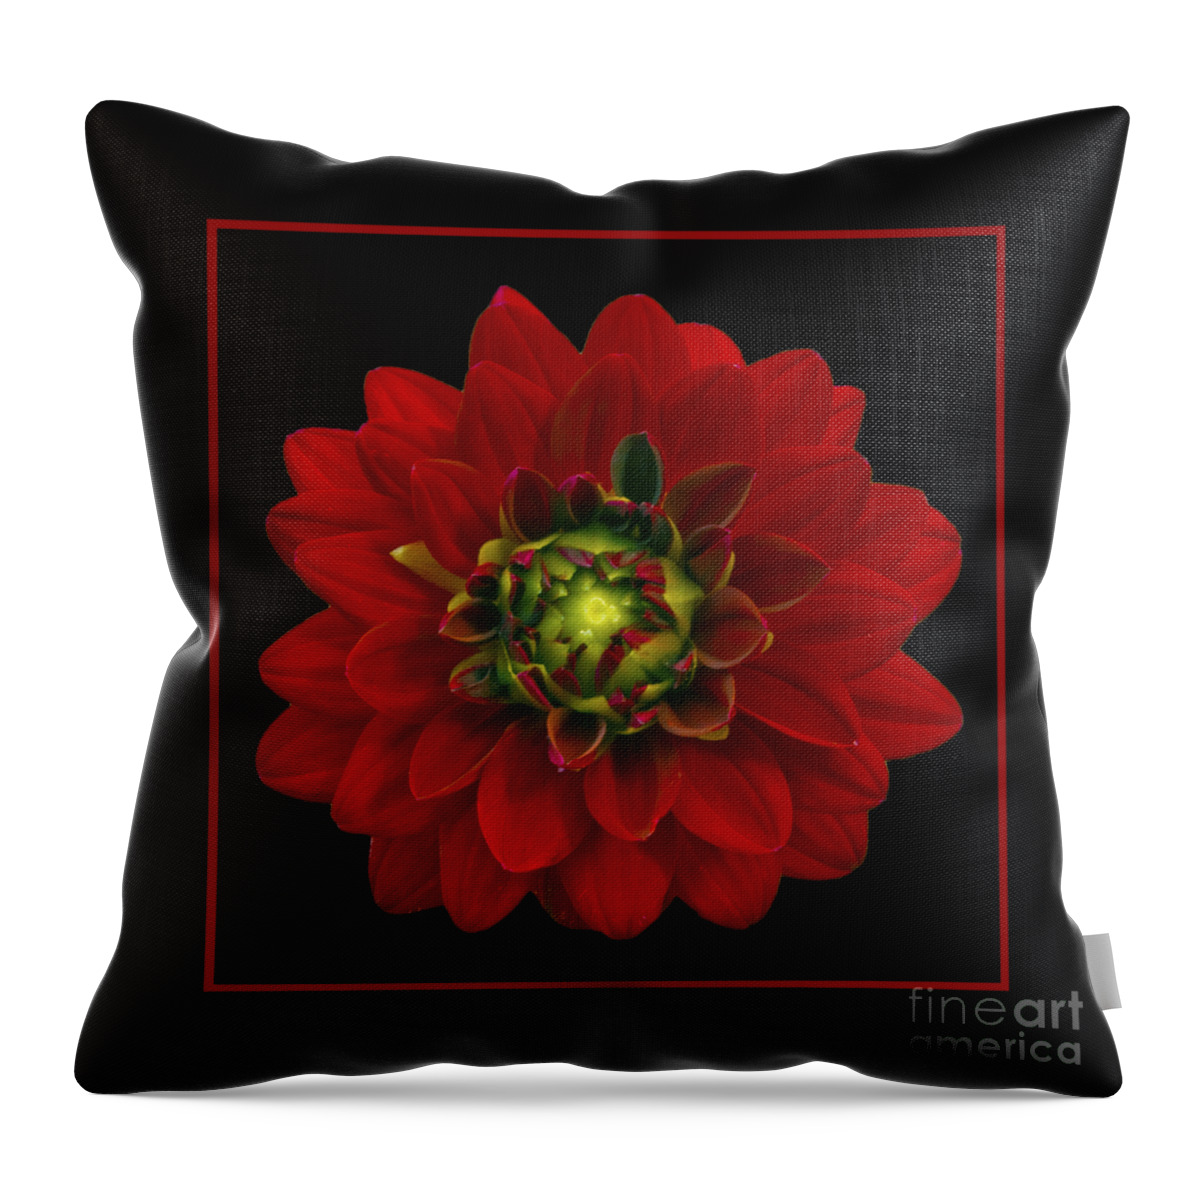 Dahlia Throw Pillow featuring the photograph Red Dahlia by Michael Peychich